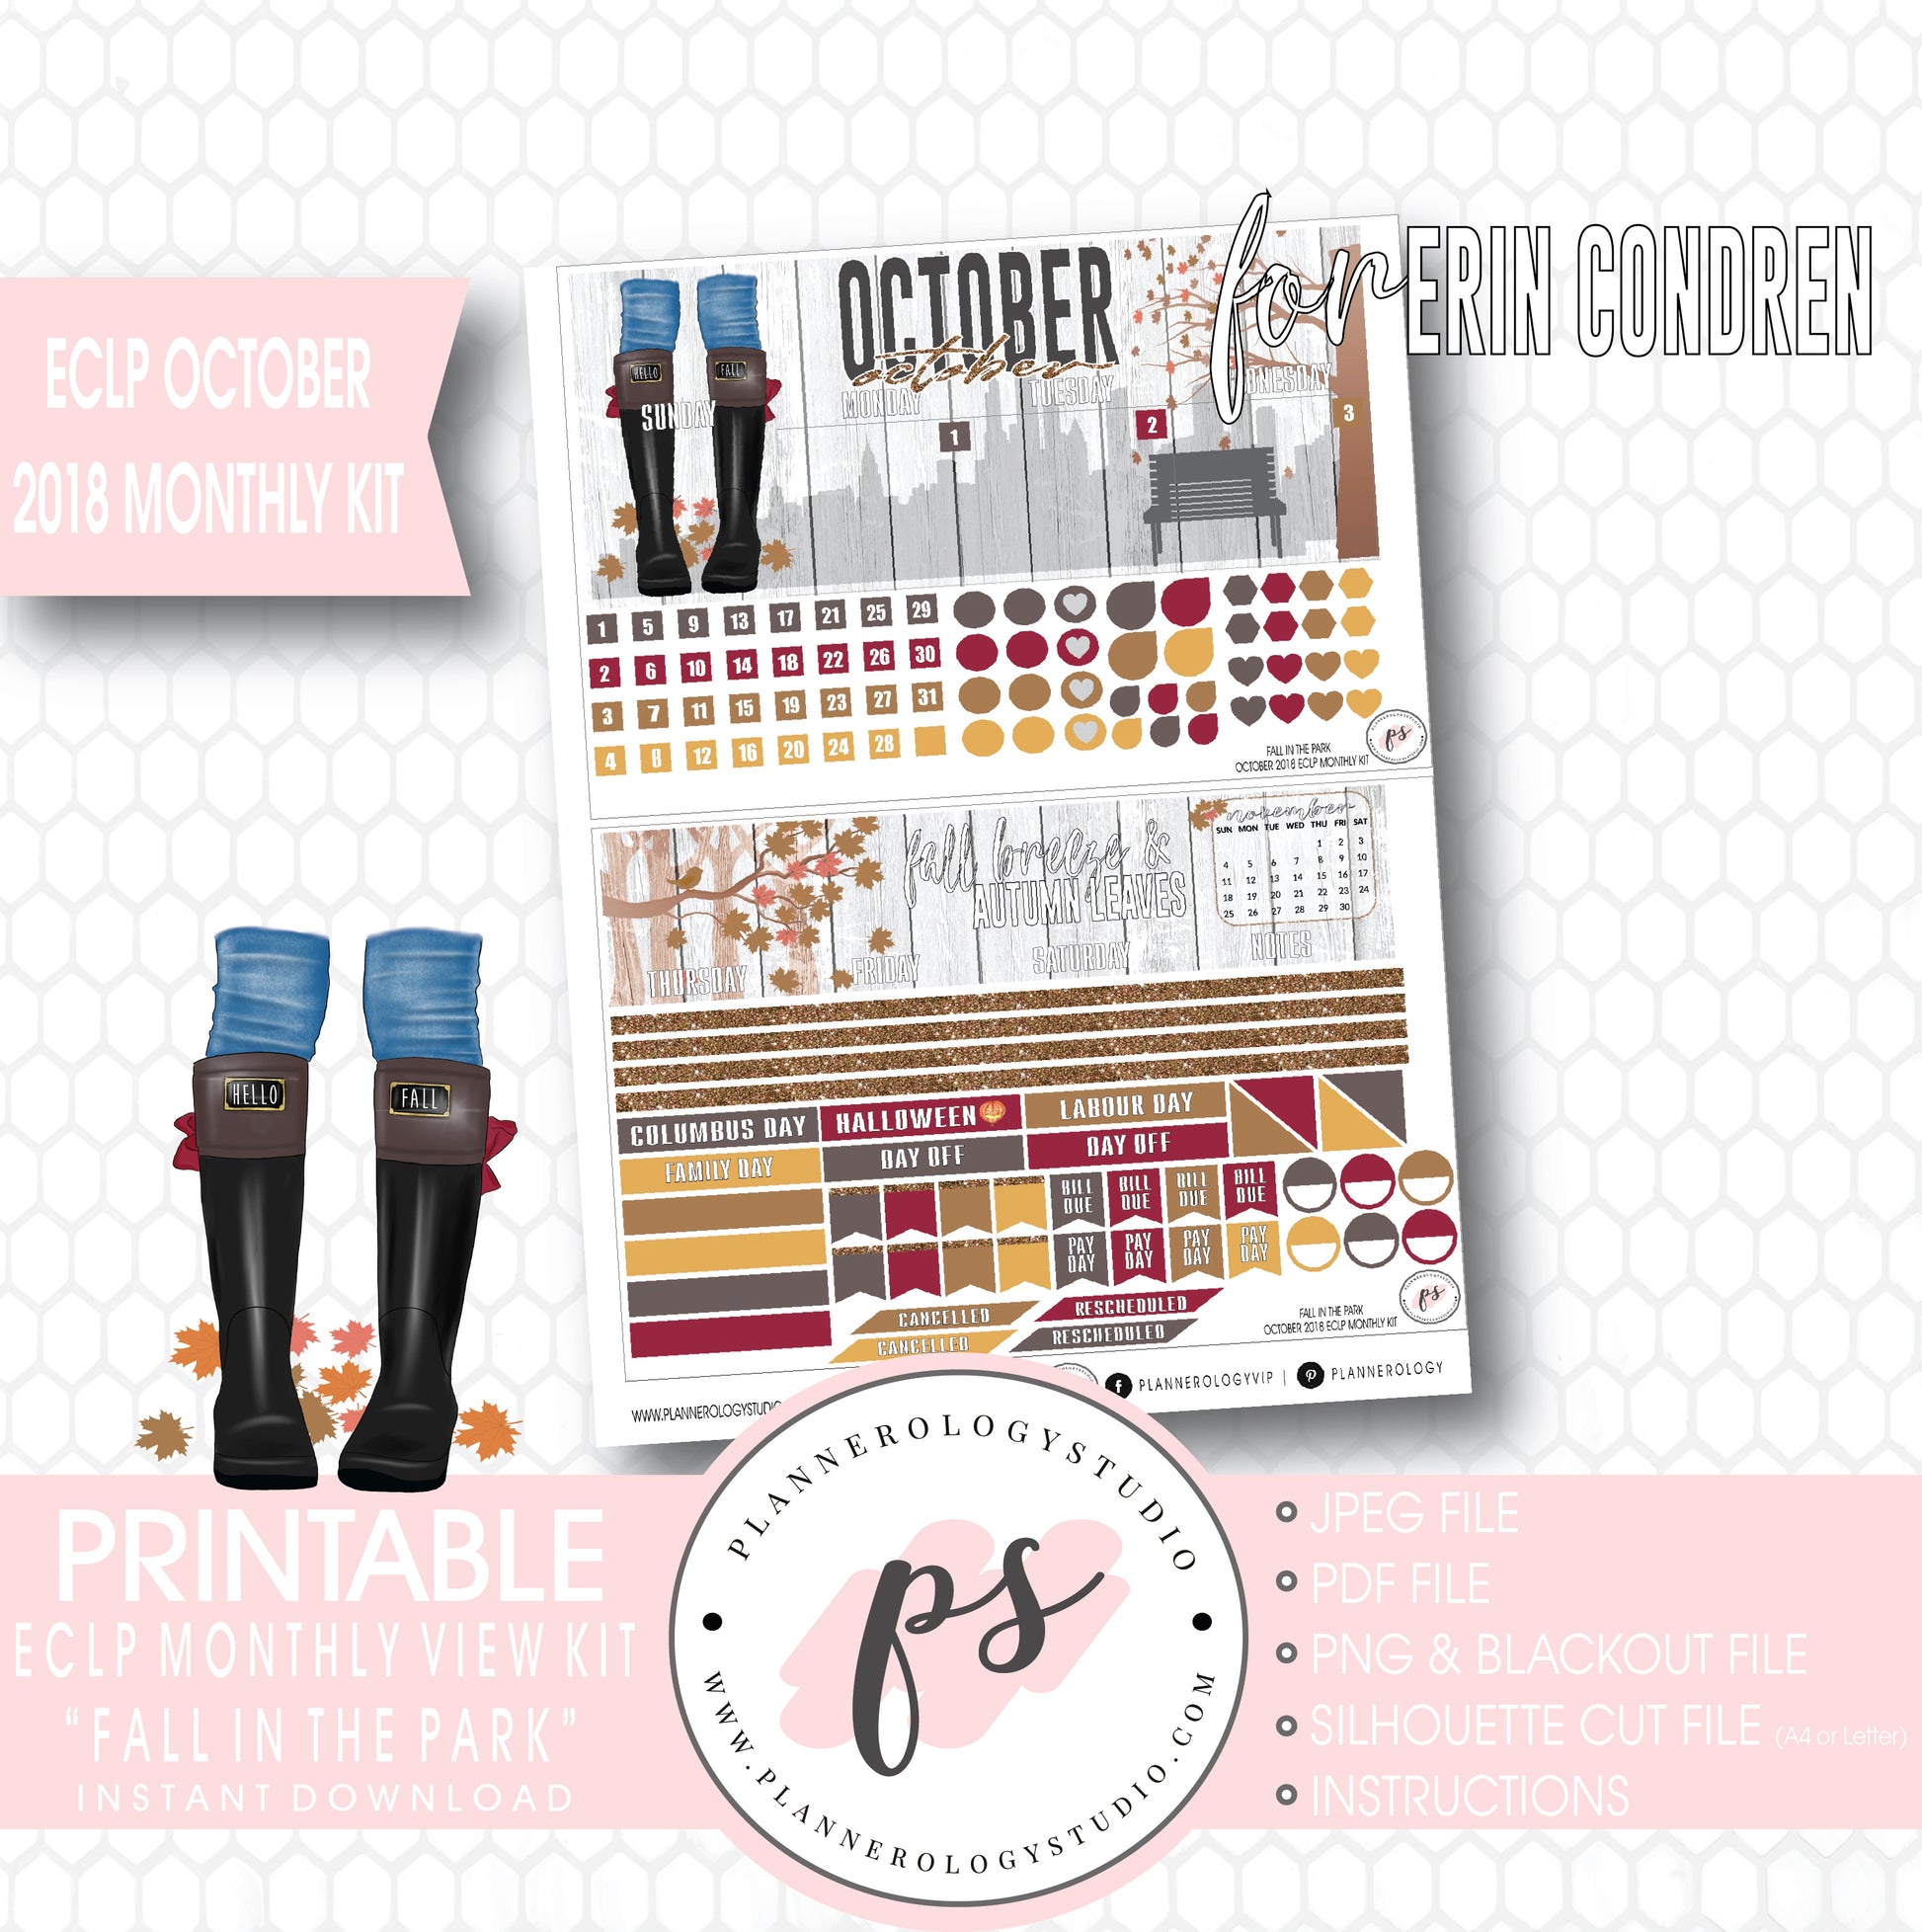 Fall in the Park October 2018 Monthly View Kit Digital Printable Planner Stickers (for use with Erin Condren) - Plannerologystudio